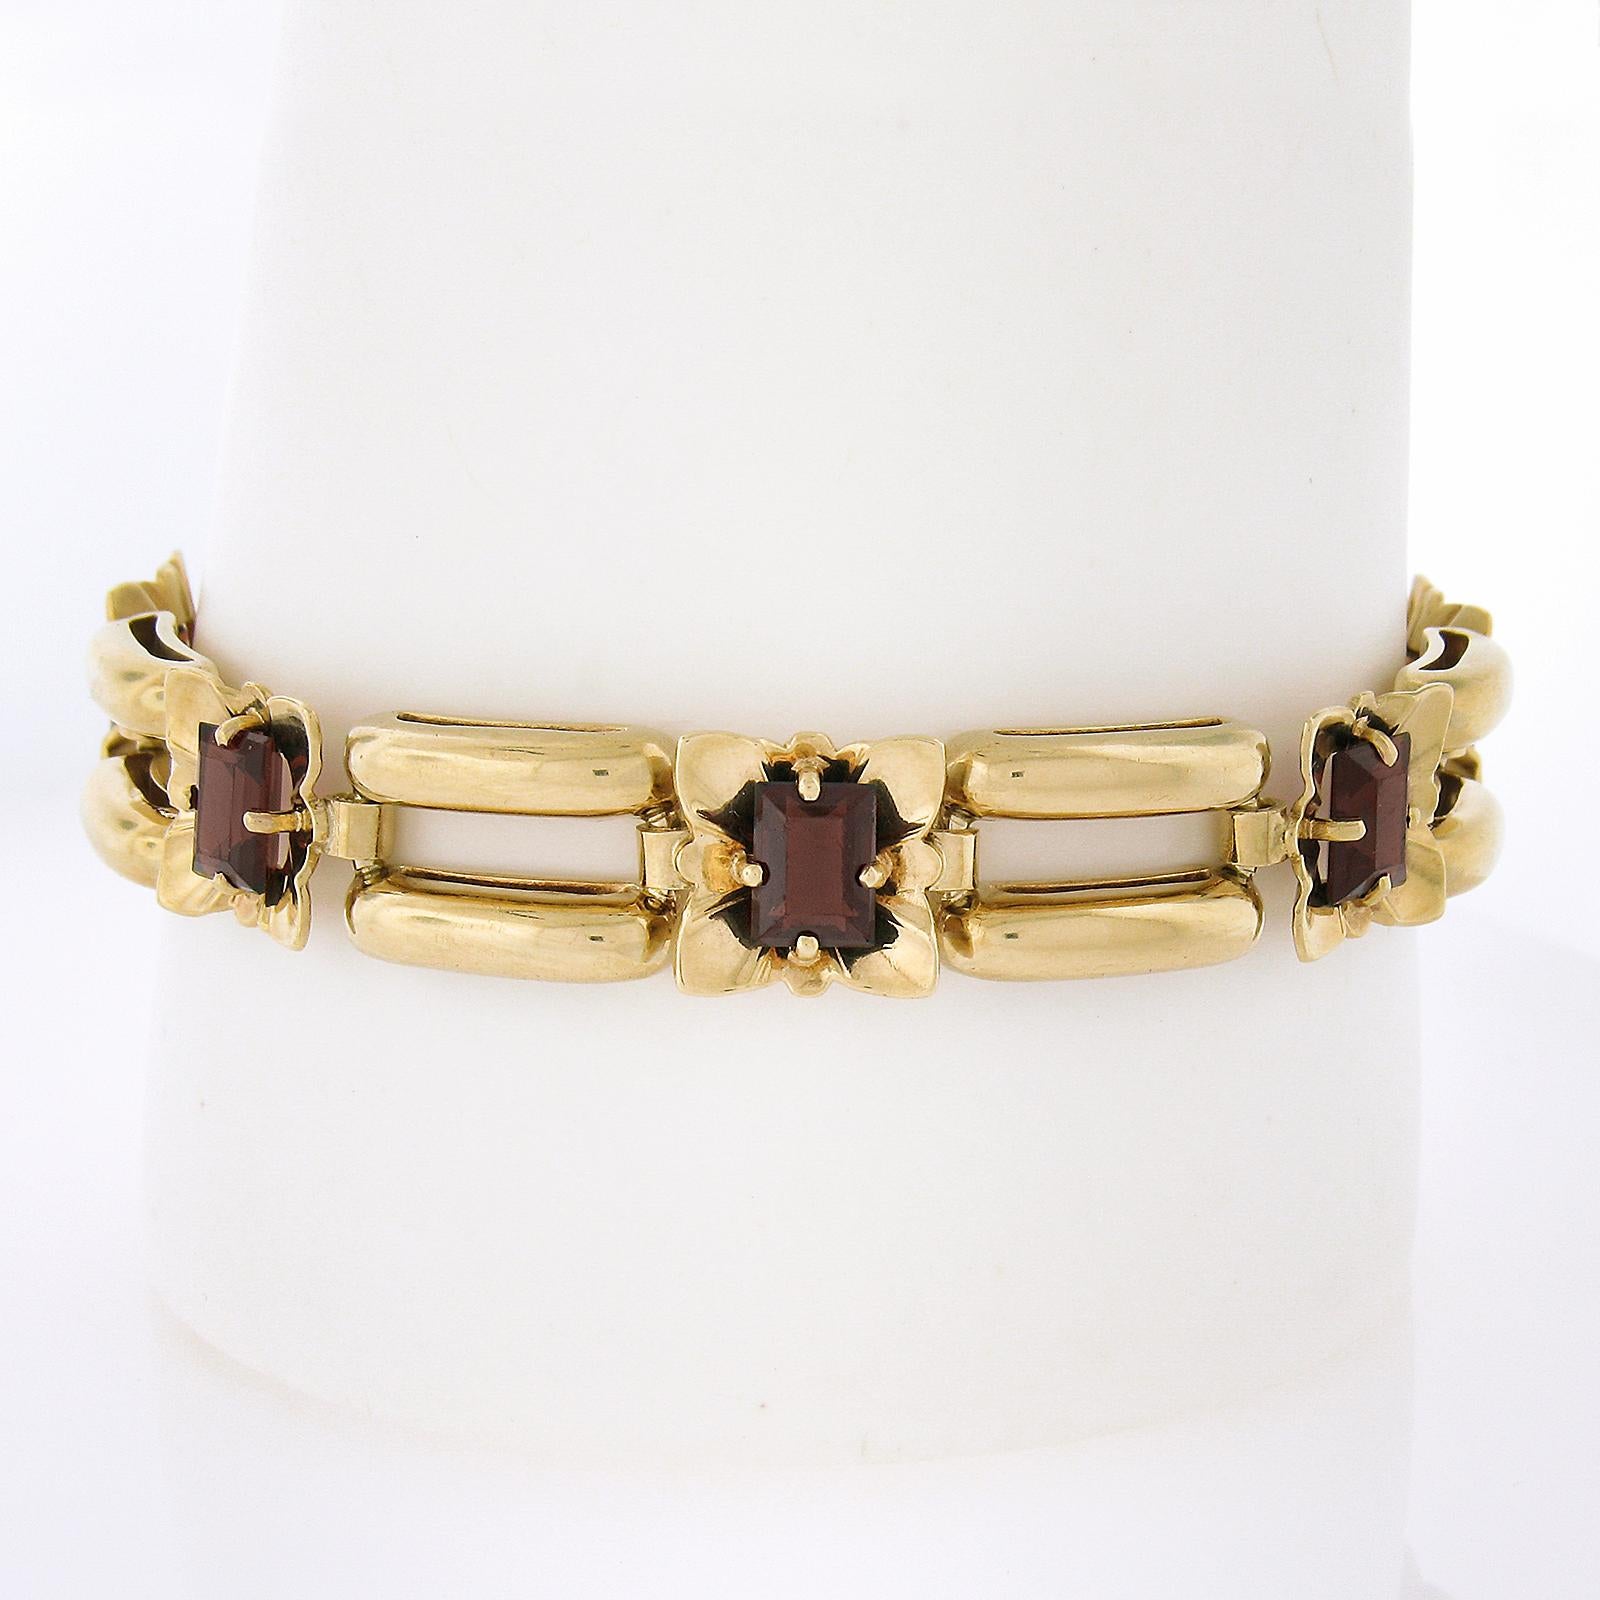 --Stone(s):--
(7) Natural Genuine Garnets - Rectangular Step Cut - Prong Set - Brownish Red Color - 7x5mm (approx. each) - 8-10ctw (approx.)

Material: Solid 14k Yellow Gold
Weight: 29.41 Grams
Chain Type: Floral & Dual Row Puffed Open Tubes Shape